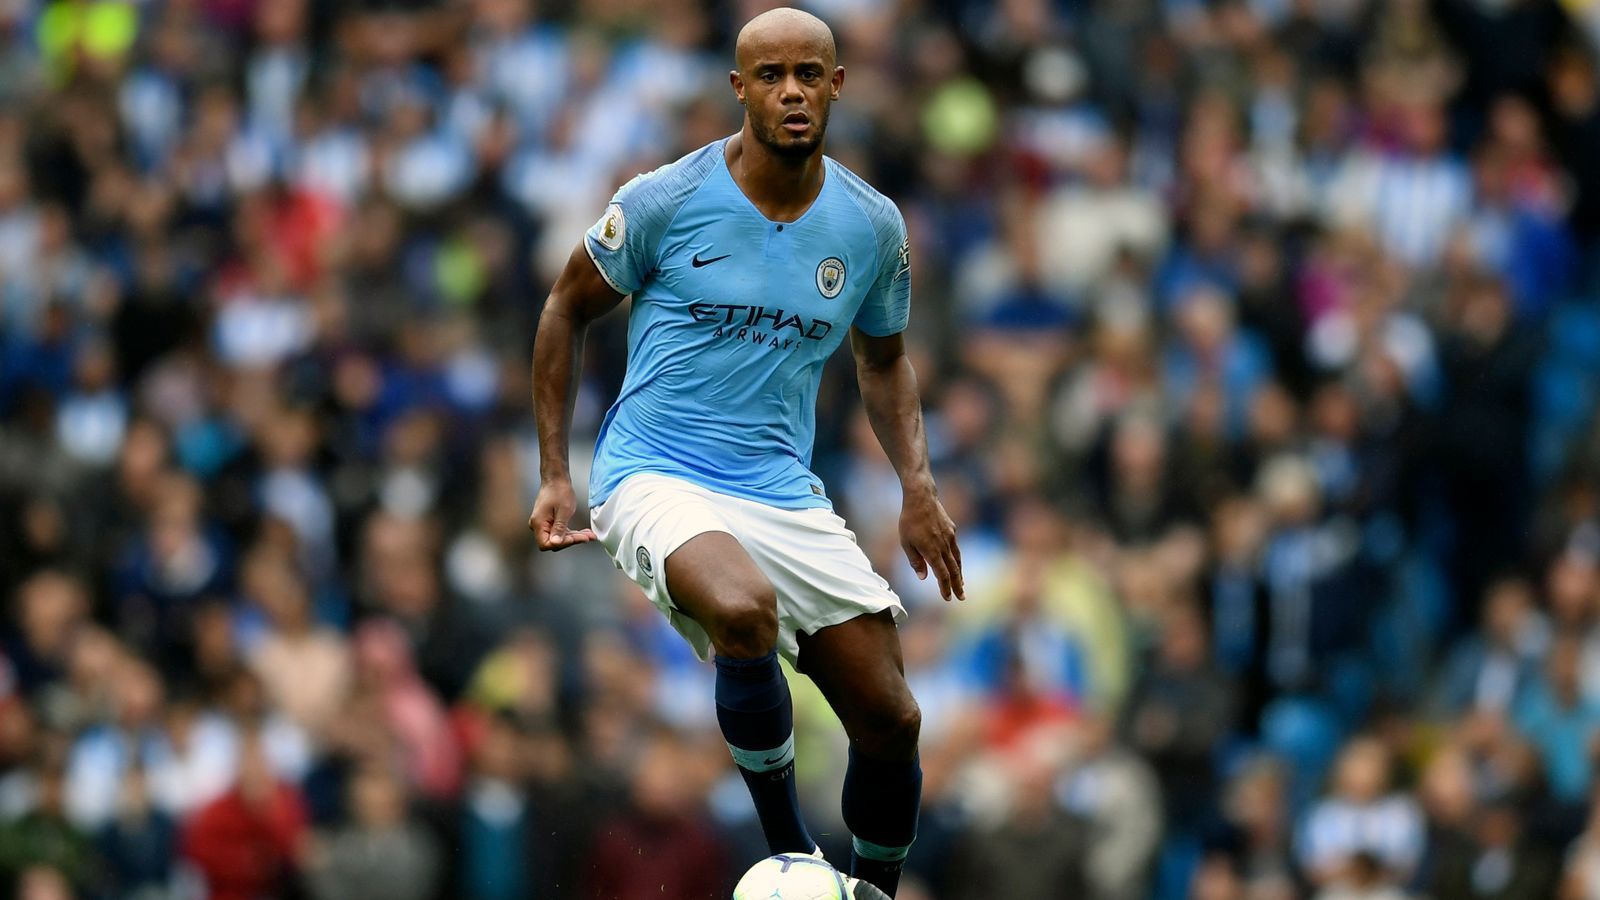 
                <strong>Abwehr - Vincent Kompany</strong><br>
                Verein in der Premier League: Manchester City (2008-2019)Spiele in der Premier League (Tore): 265 (18)Meistertitel in der Premier League: 4
              